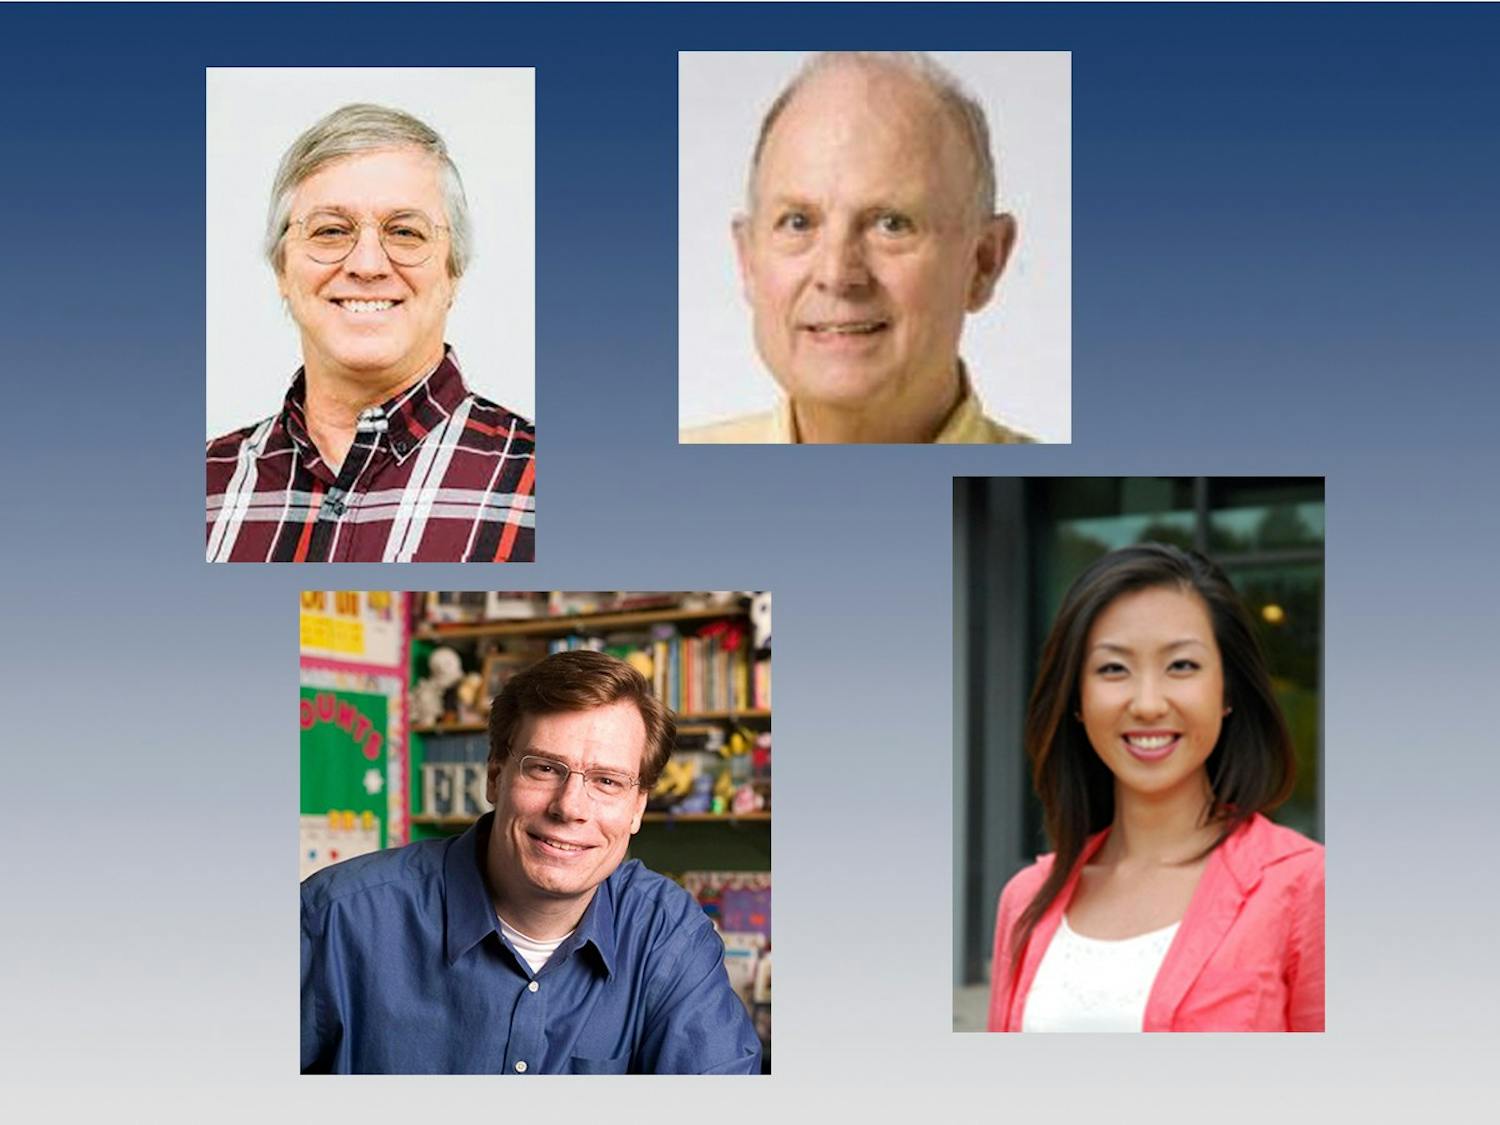 From top left: Professors Gayle Boyd, Edward Tower, Thomas J. Nechyba, and Xiao Yu Wang signed an open letter opposing the reelection of President Donald Trump.